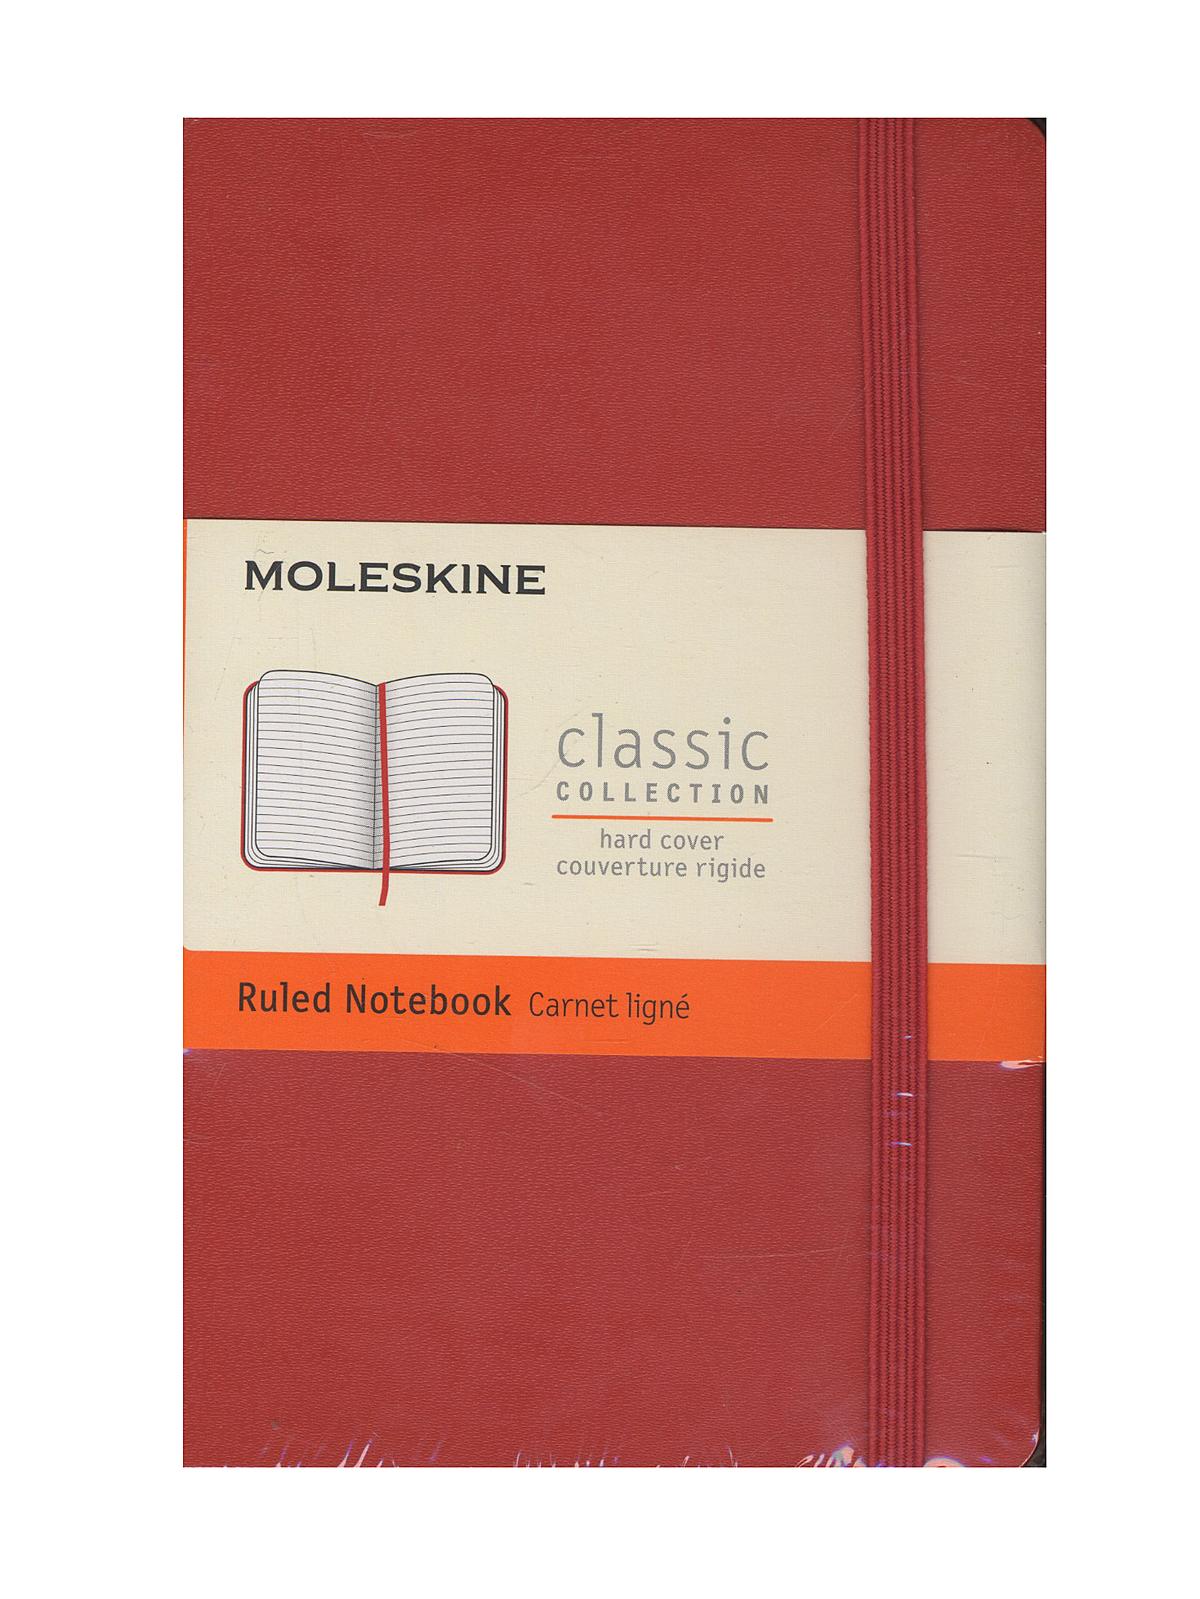 Classic Hard Cover Notebooks Coral Orange 3 1 2 In. X 5 1 2 In. 192 Pages, Lined